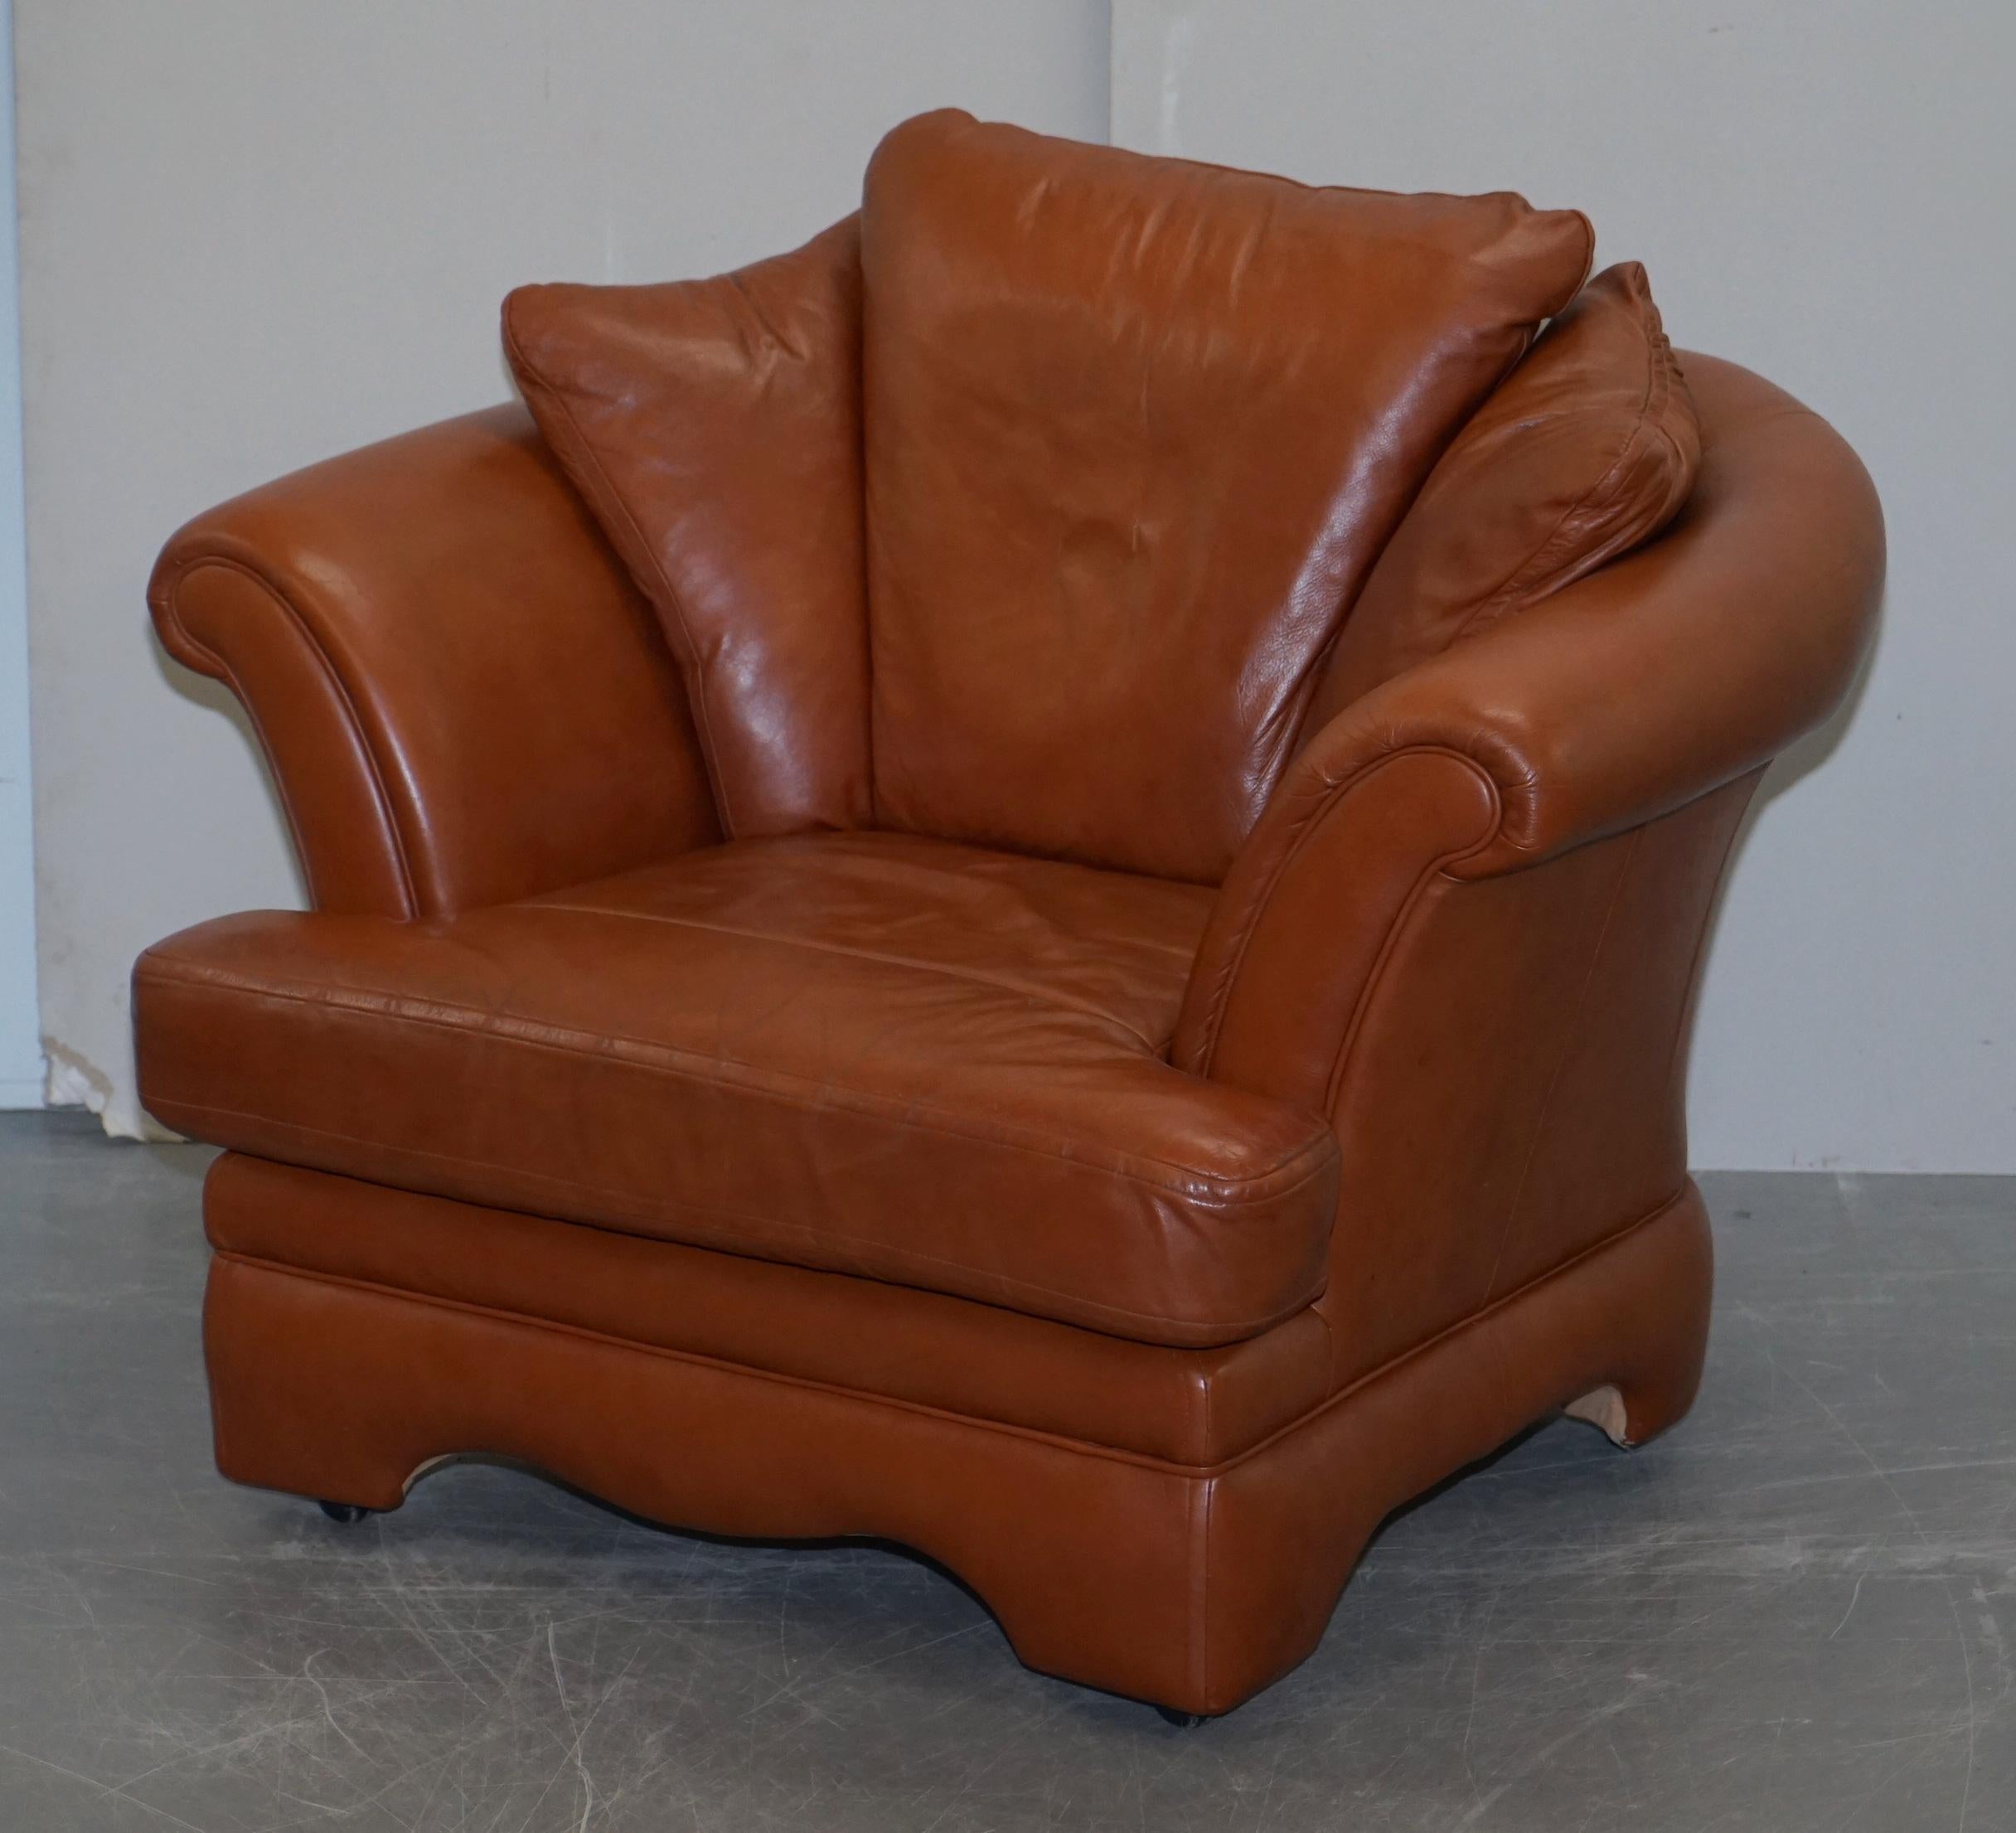 Lovely Small Aged Tan Brown Leather Sofa and Matching Armchair Two-Piece Suite For Sale 4